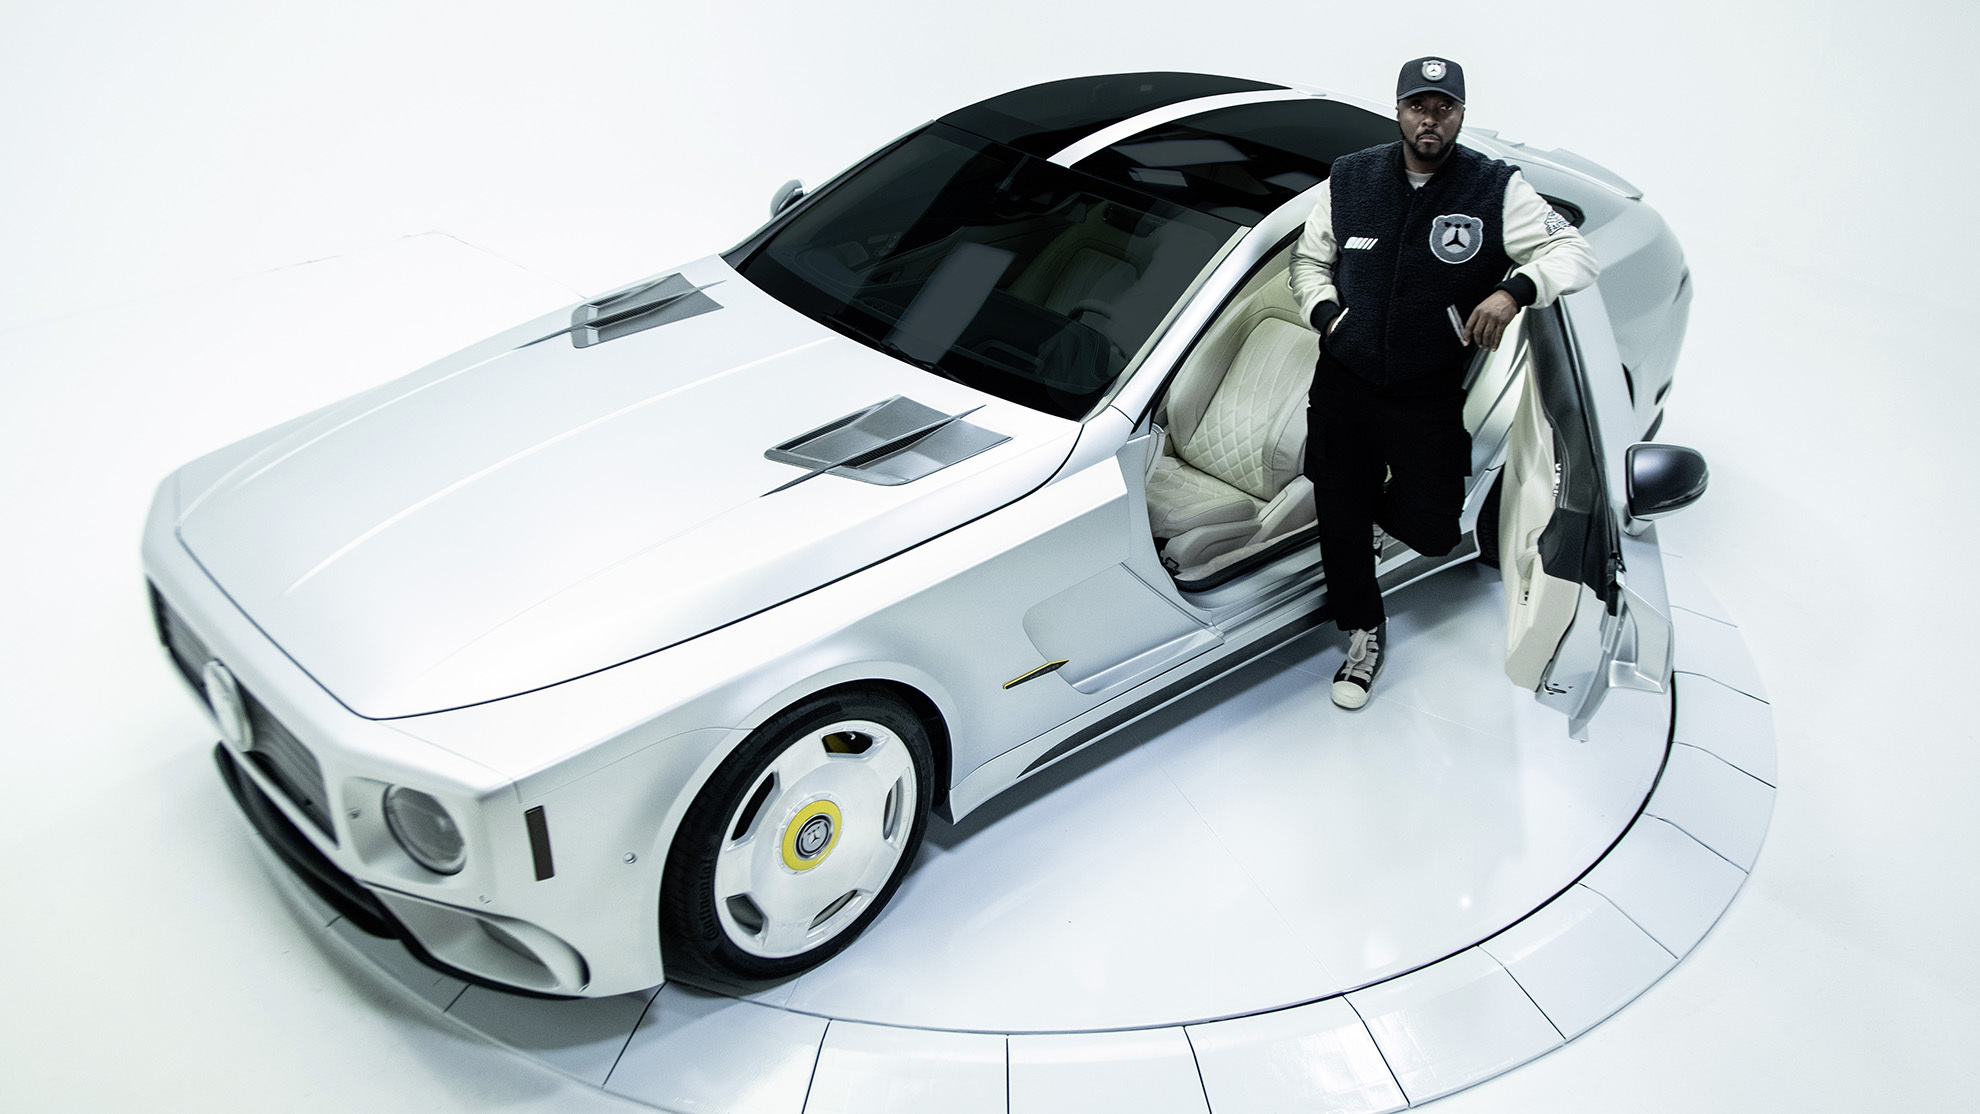 will.i.am - Mercedes-Benz - will.i.amg - one-off - AMG GT Coupe - SLS - Clase G